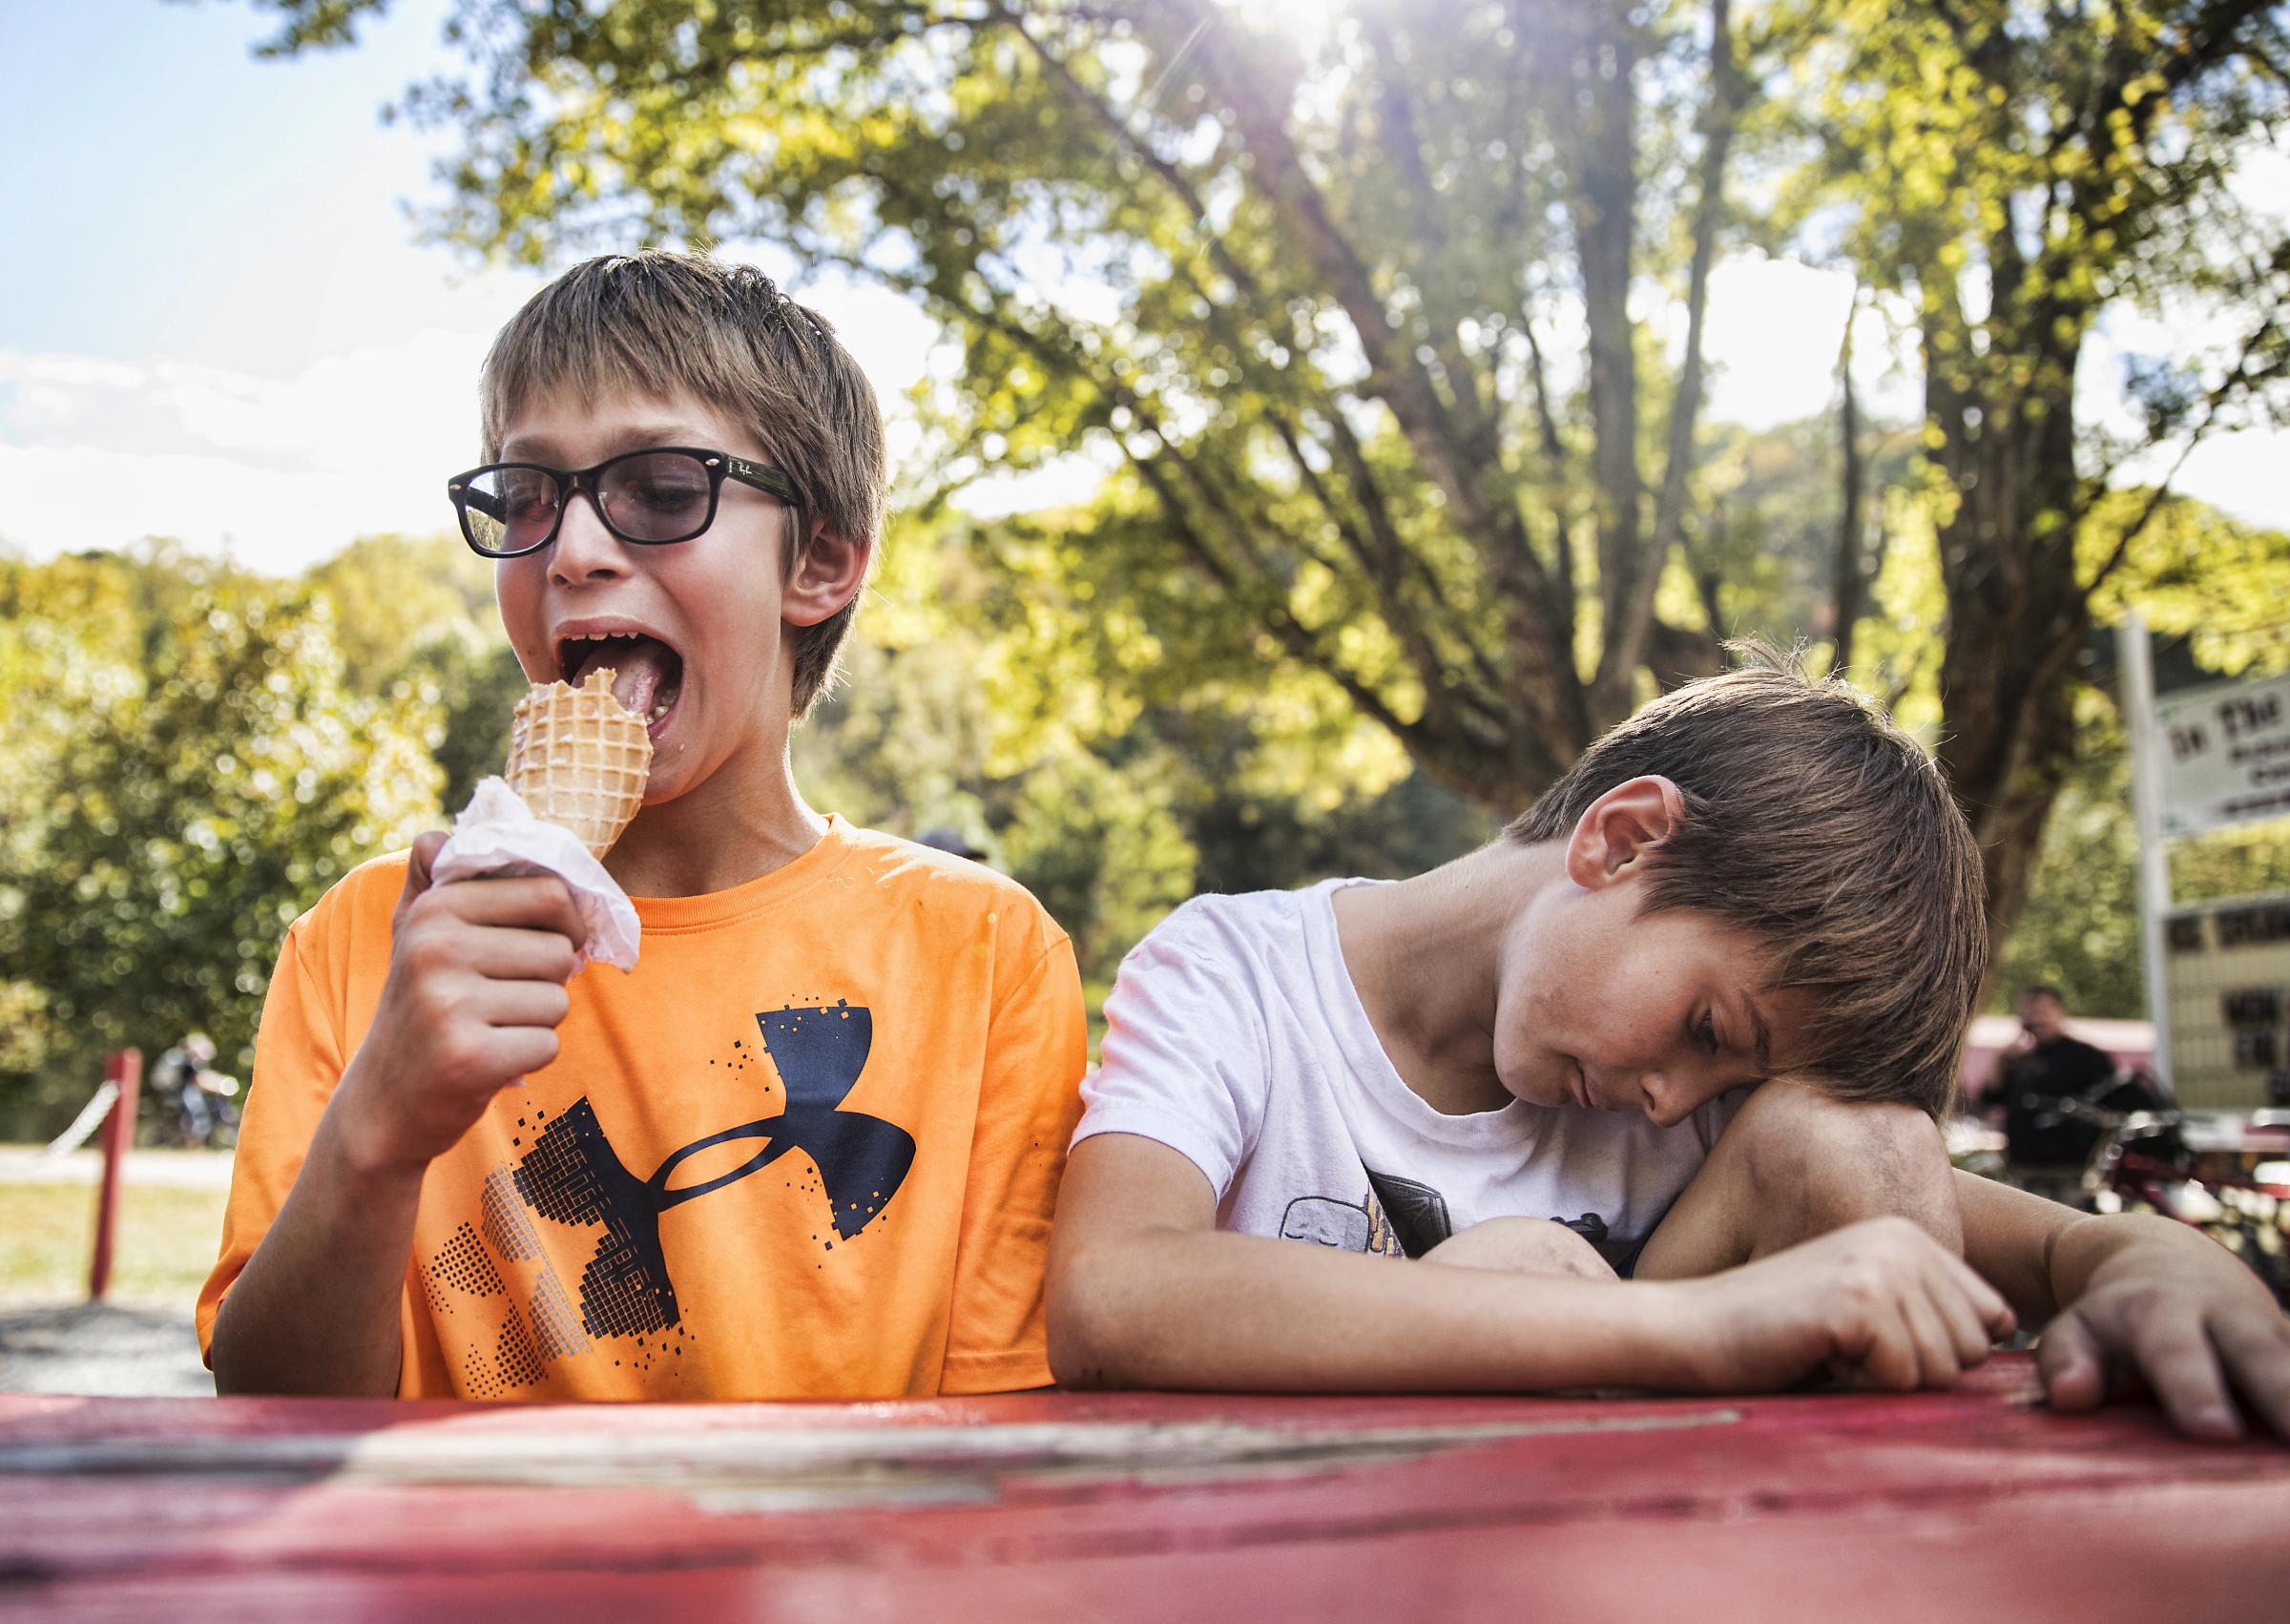 Growing Up - A boy enjoys a snack at Off the Beaten Path Ice Cream...